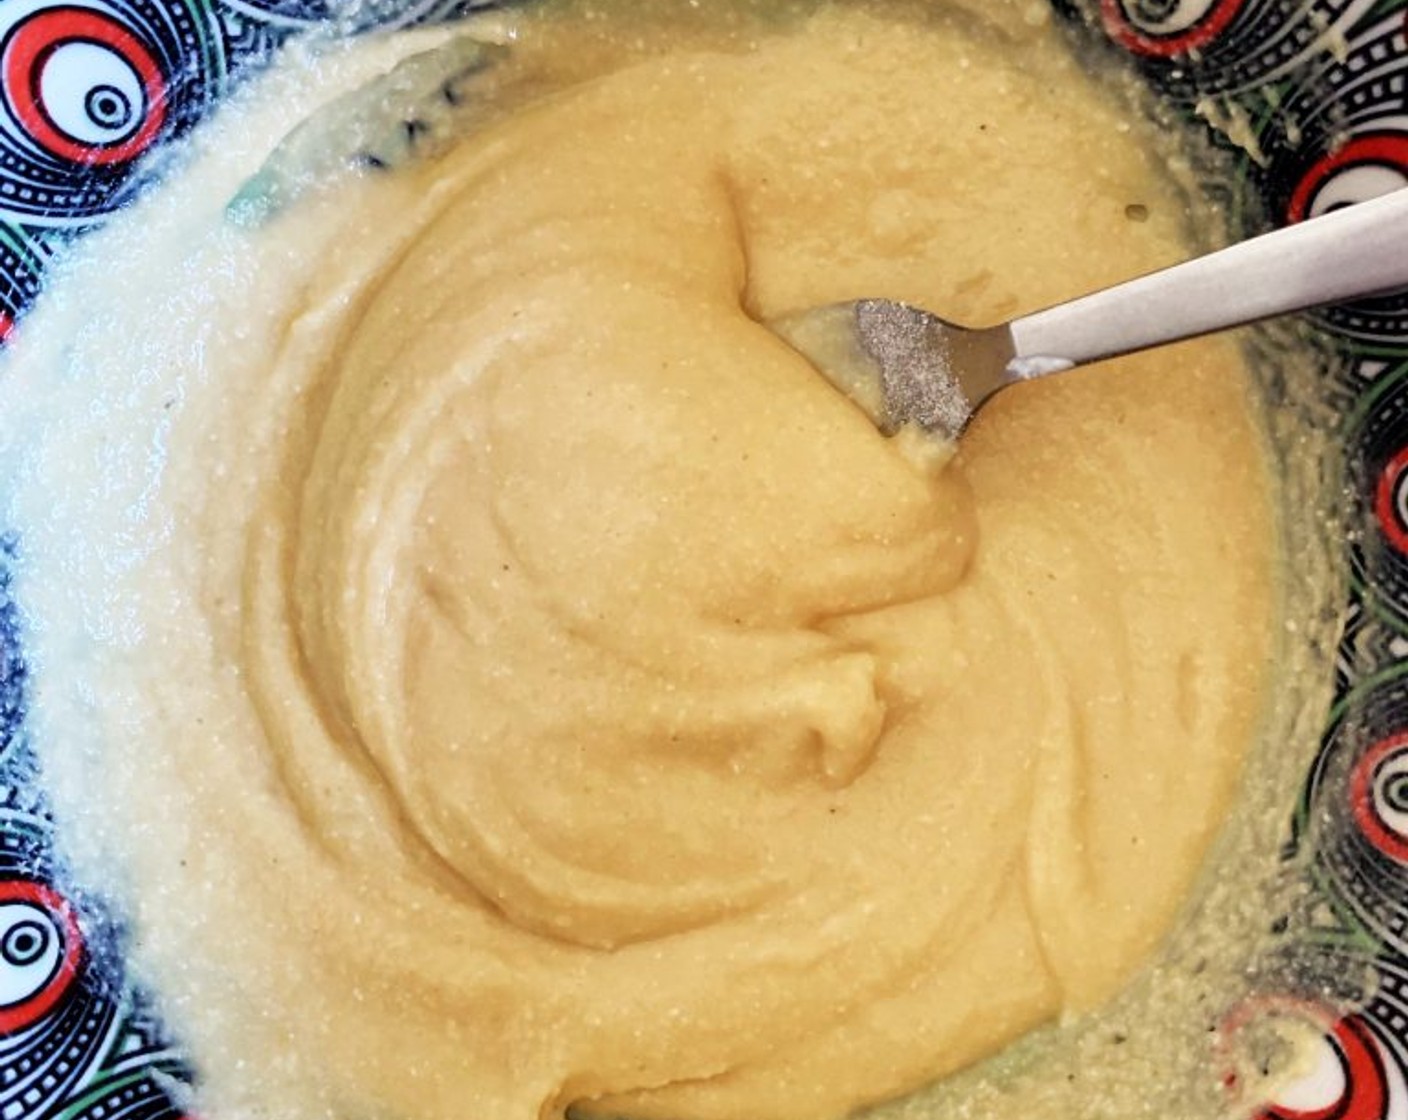 step 2 In a bowl whisk together Organic Egg (1), Granulated Erythritol (2 Tbsp), and Greek Yogurt (1/3 cup). Then add the Soy Flour (1/3 cup), Coconut Flour (2 1/2 Tbsp), Salt (1 pinch), Vanilla Protein Powder (3 Tbsp), and Baking Powder (1 1/4 tsp).